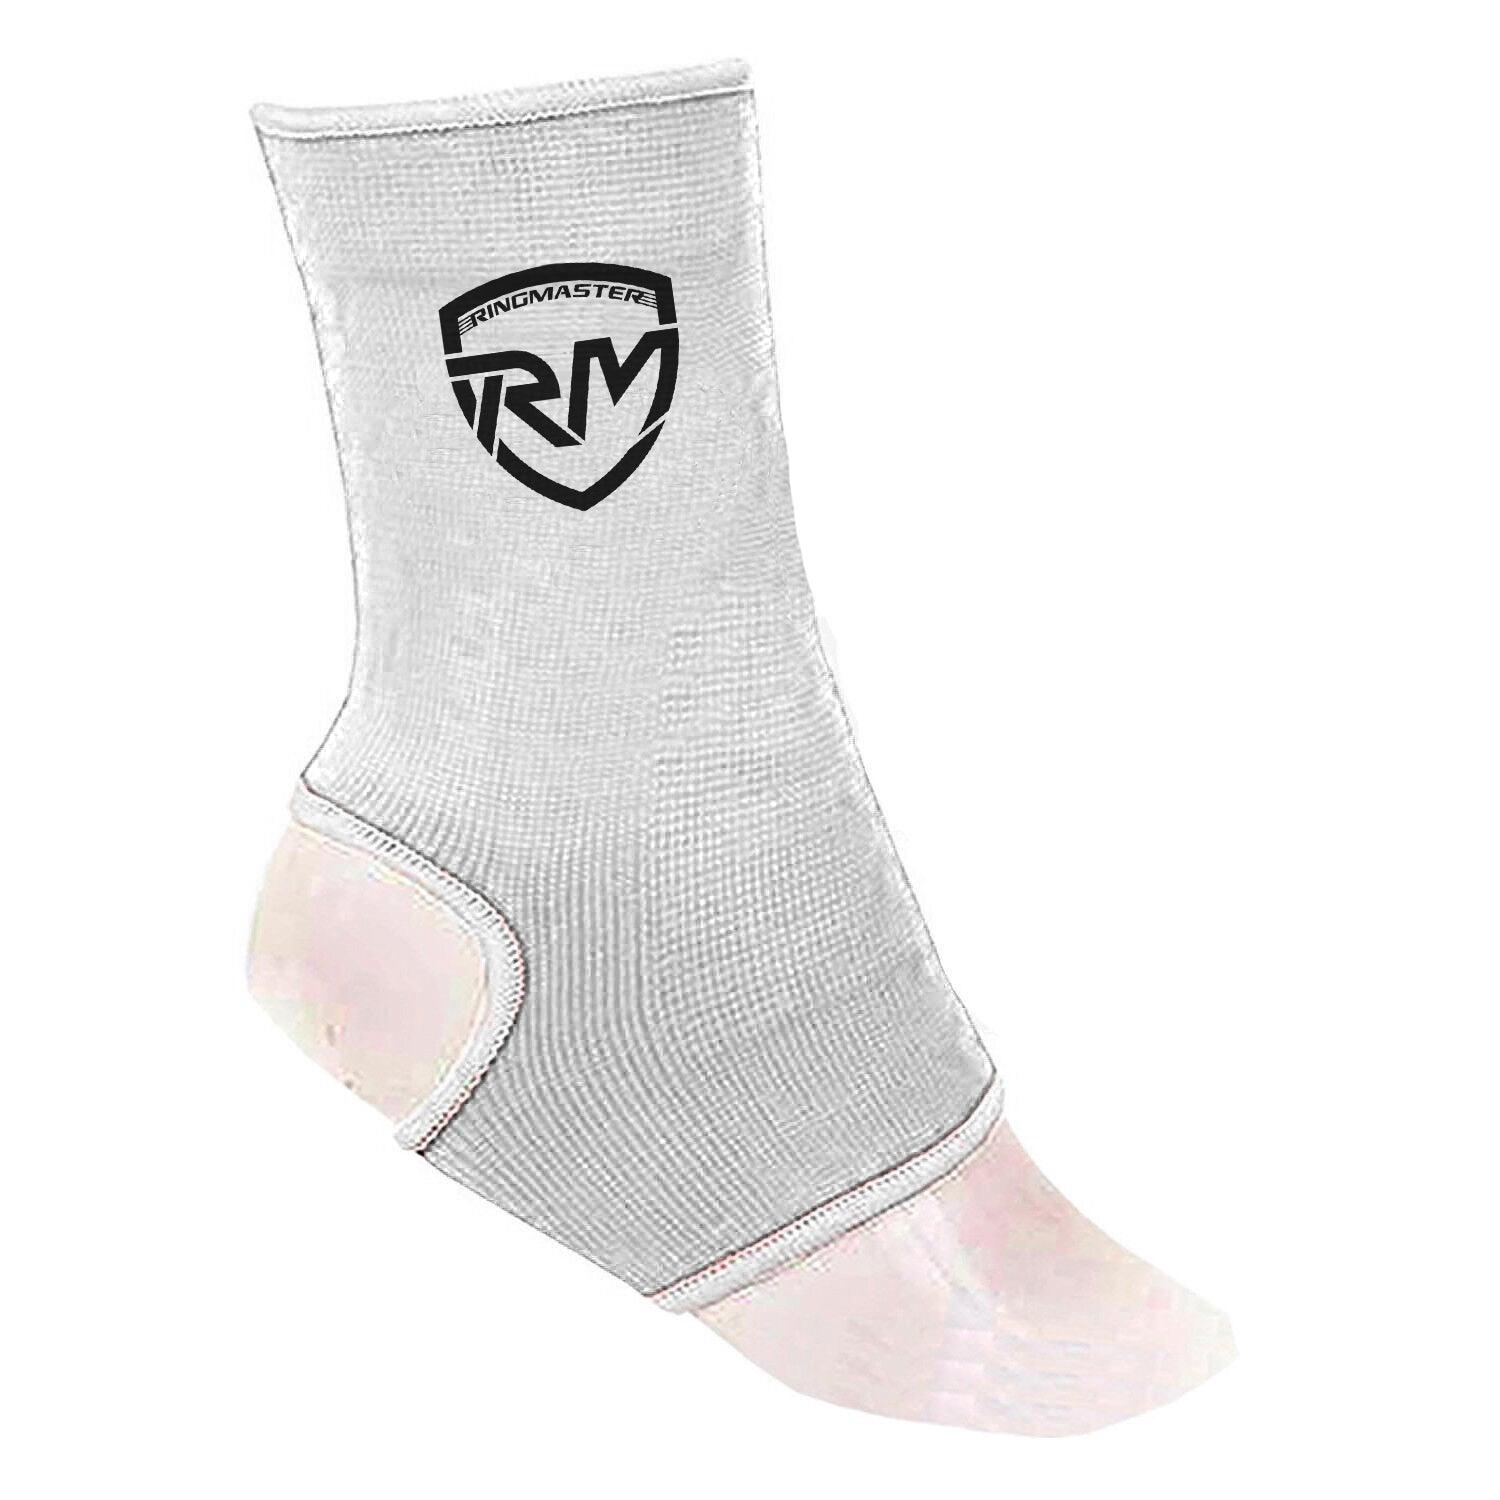 RingMaster Sports Ankle Support X Series One Size White - RINGMASTER SPORTS - Made For Champions